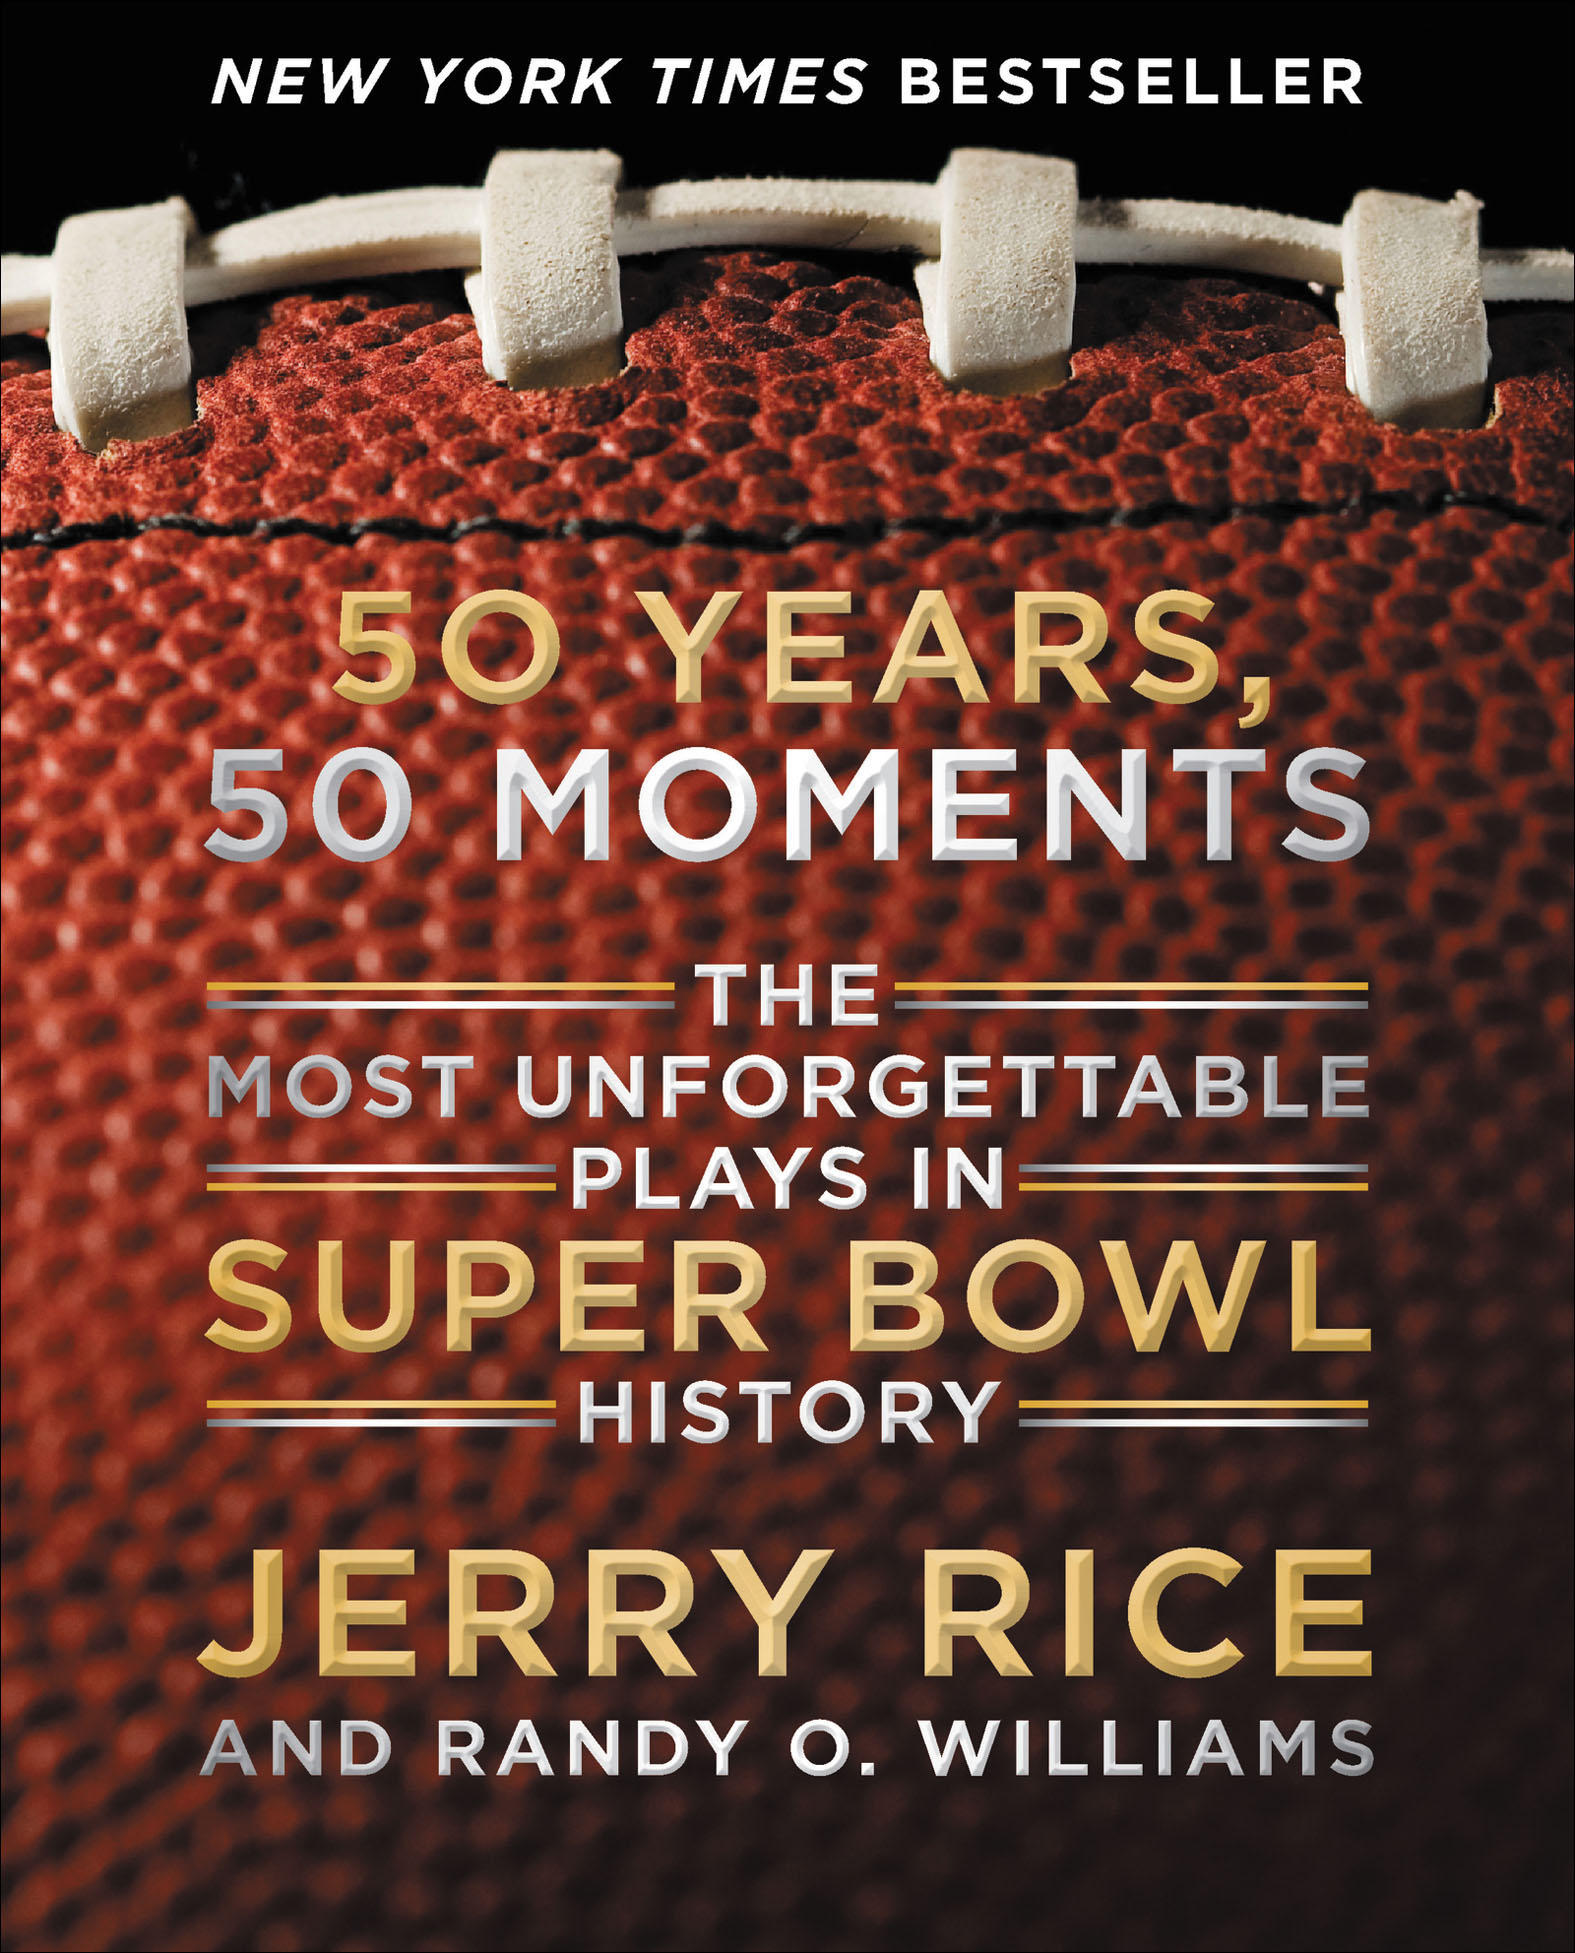 50 years, 50 moments the most unforgettable plays in Super Bowl history cover image